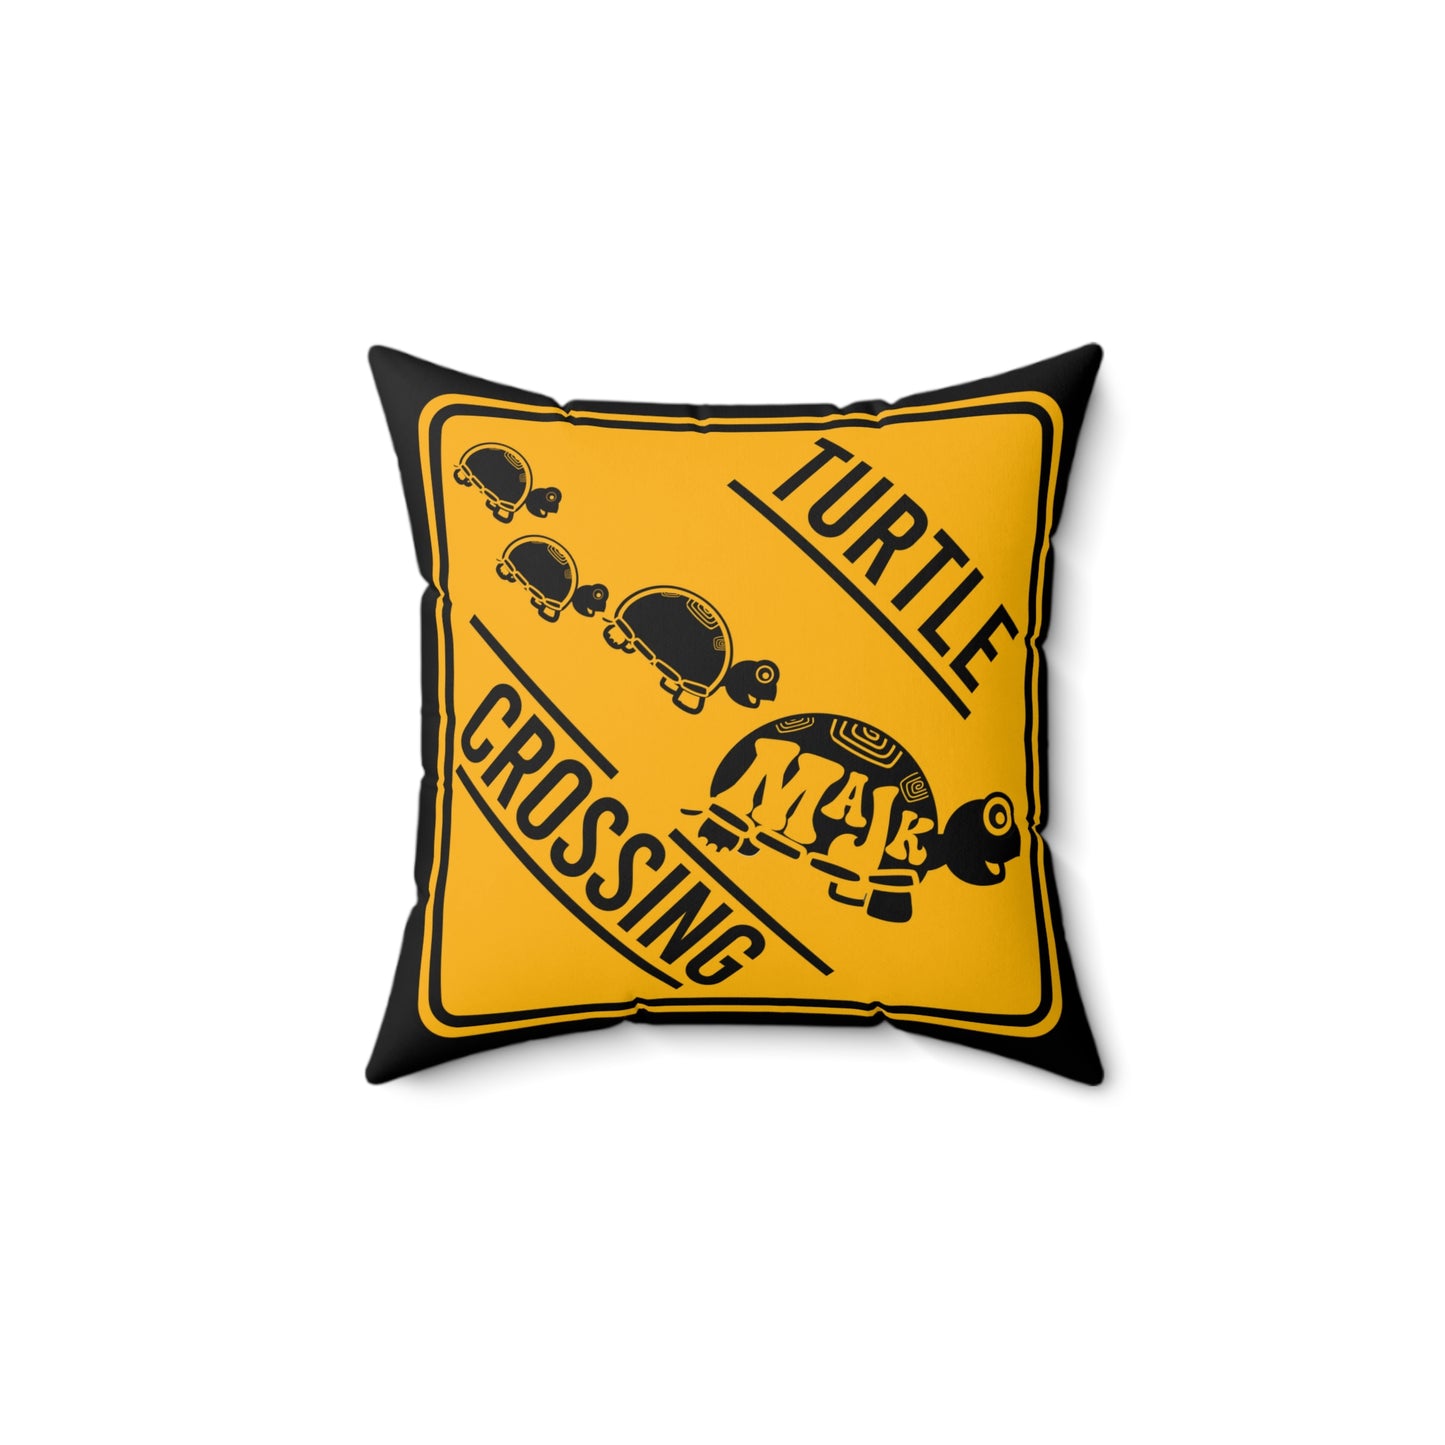 Square Throw Pillow- "Use turtle Caution" 14in x 14 in